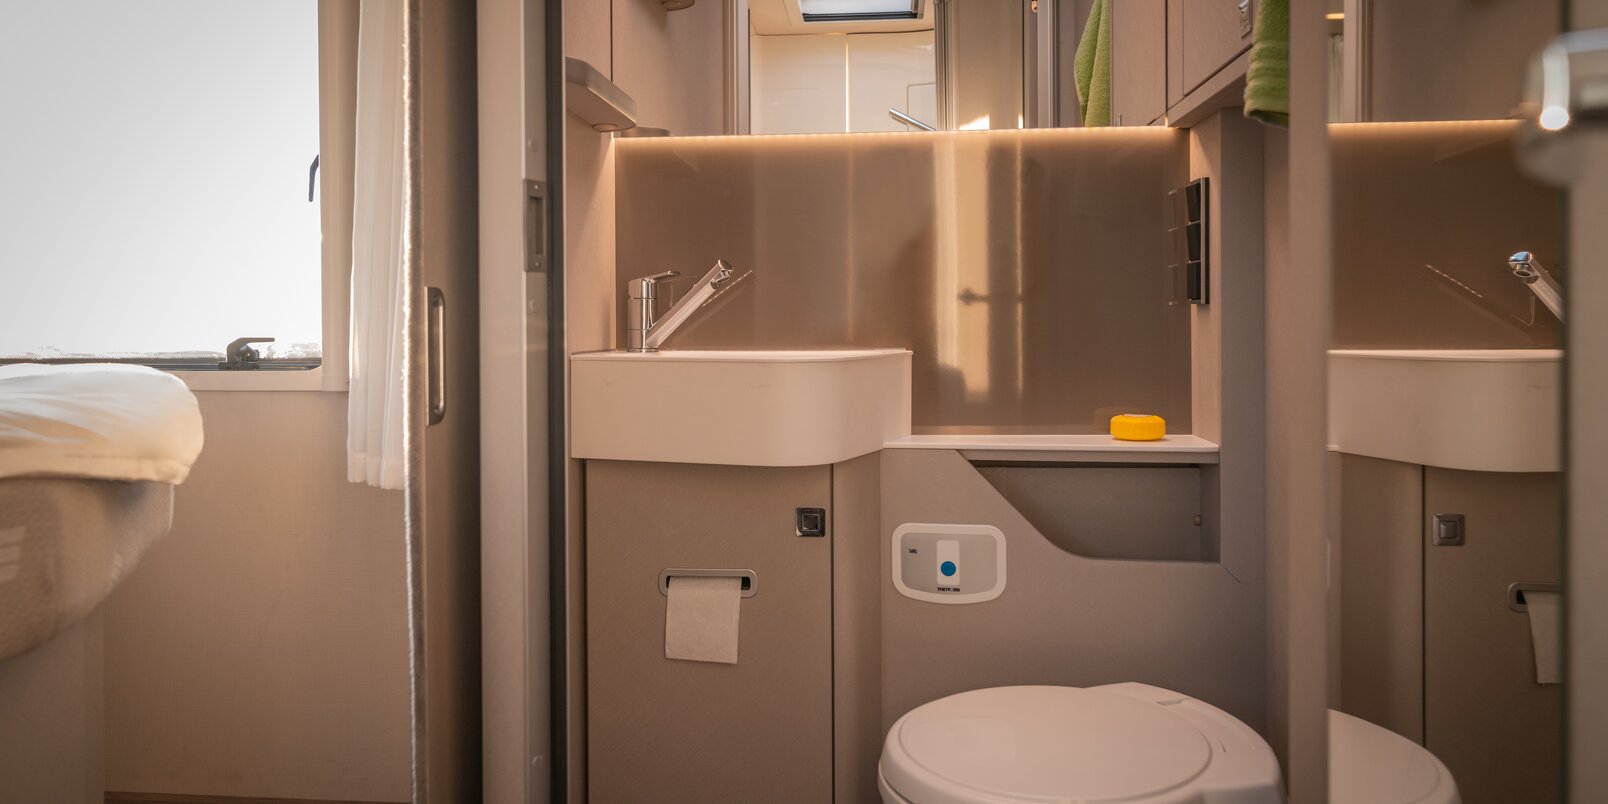 Mirror, wash basin, storage space and toilet in the bathroom of the HYMER Tramp S motorhome